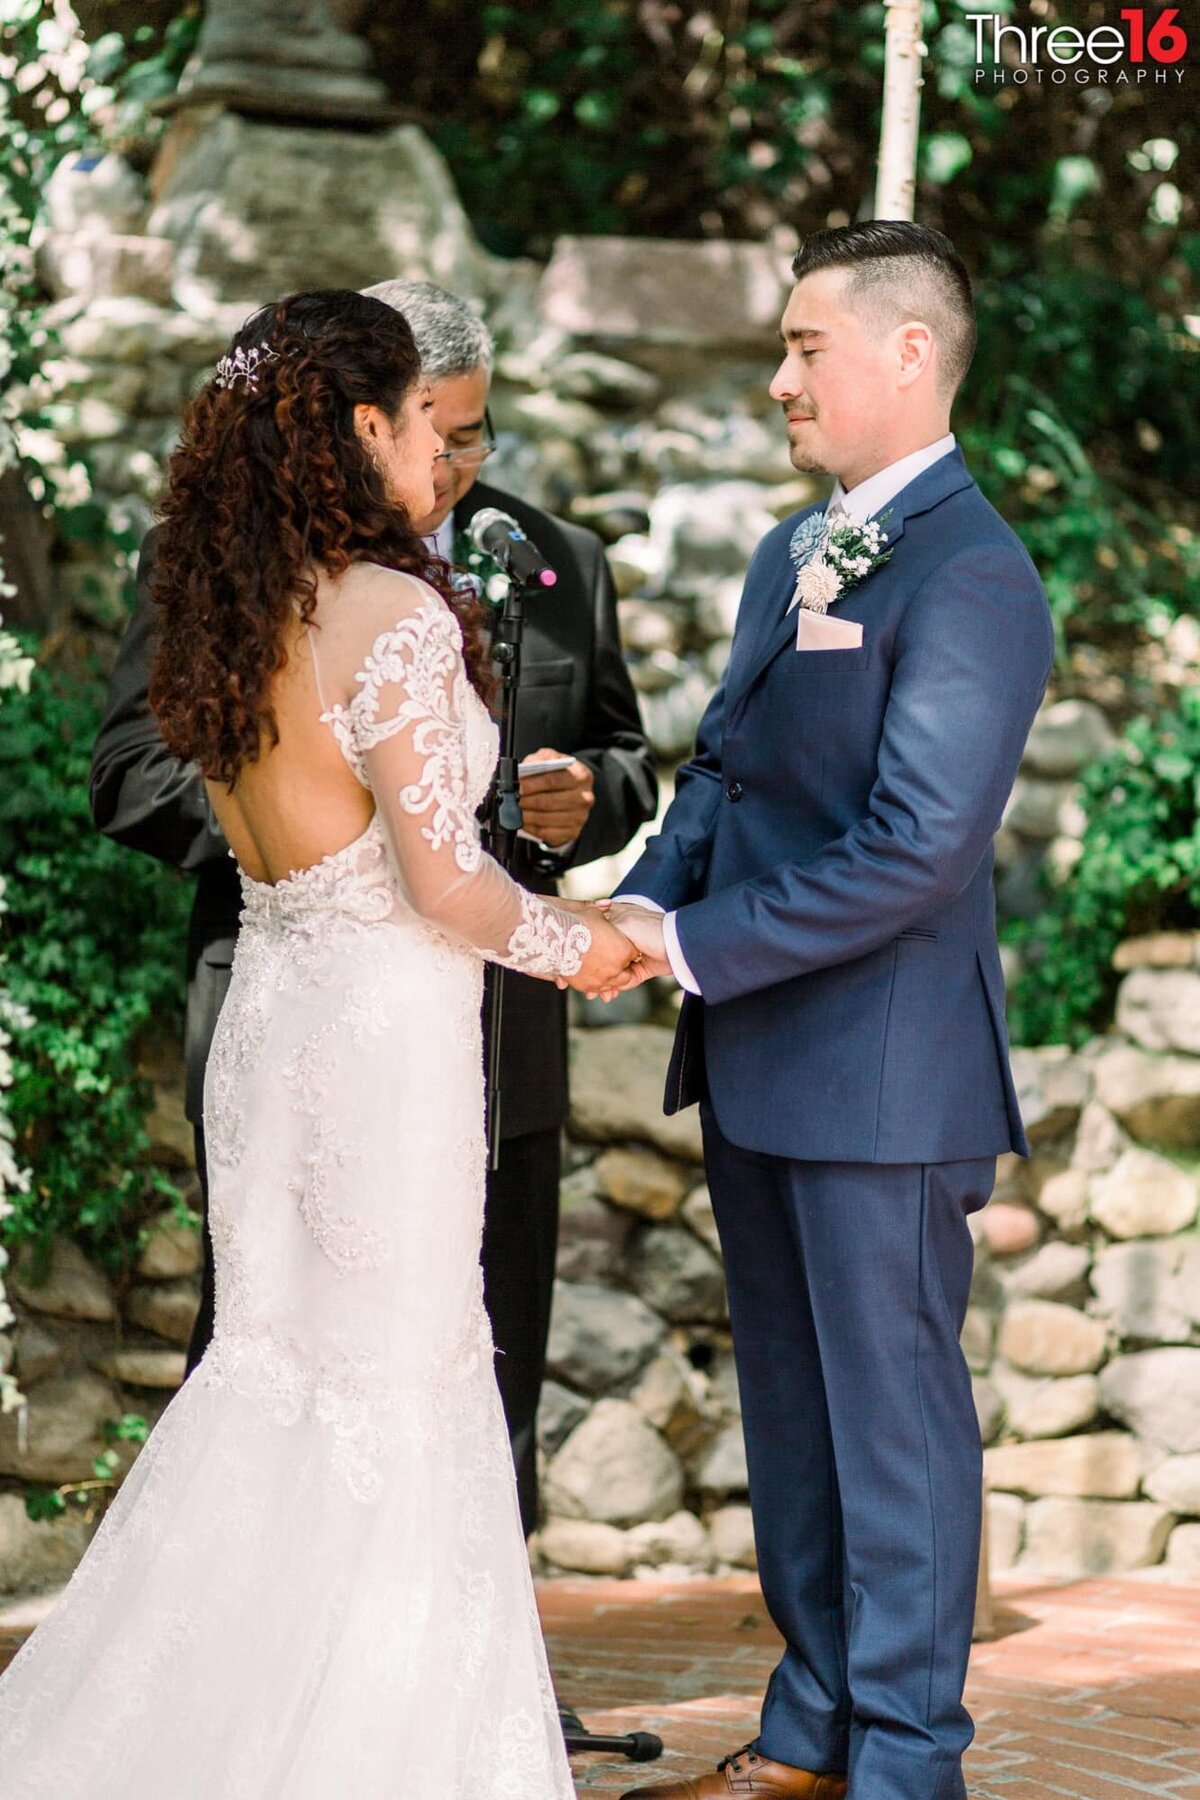 Bride and Groom face each other while holding hands as the officiant performs the ceremony